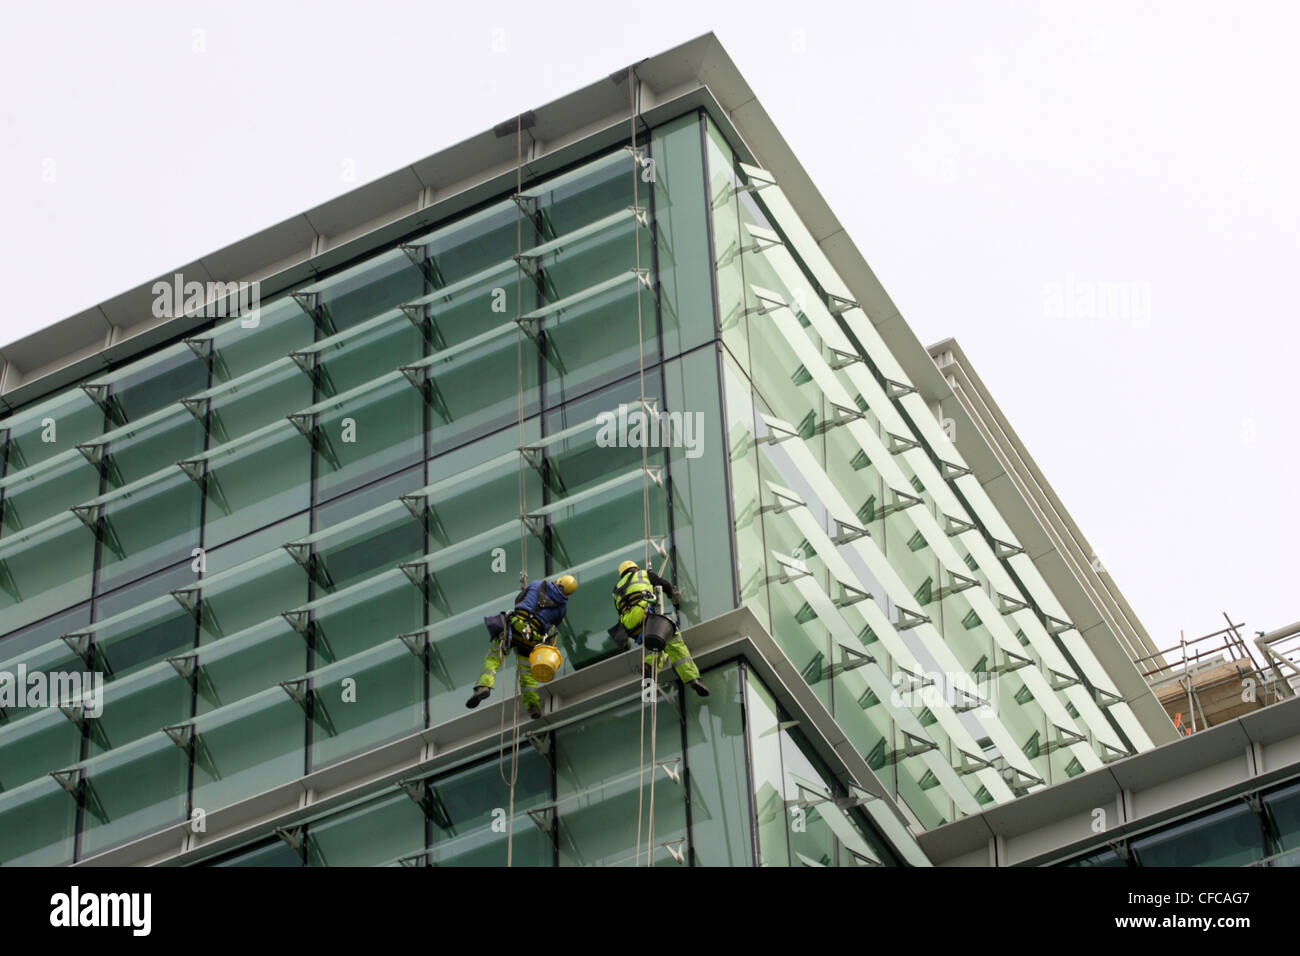 https://c8.alamy.com/comp/CFCAG7/window-cleaners-in-climbing-gear-are-suspended-by-ropes-outside-a-CFCAG7.jpg